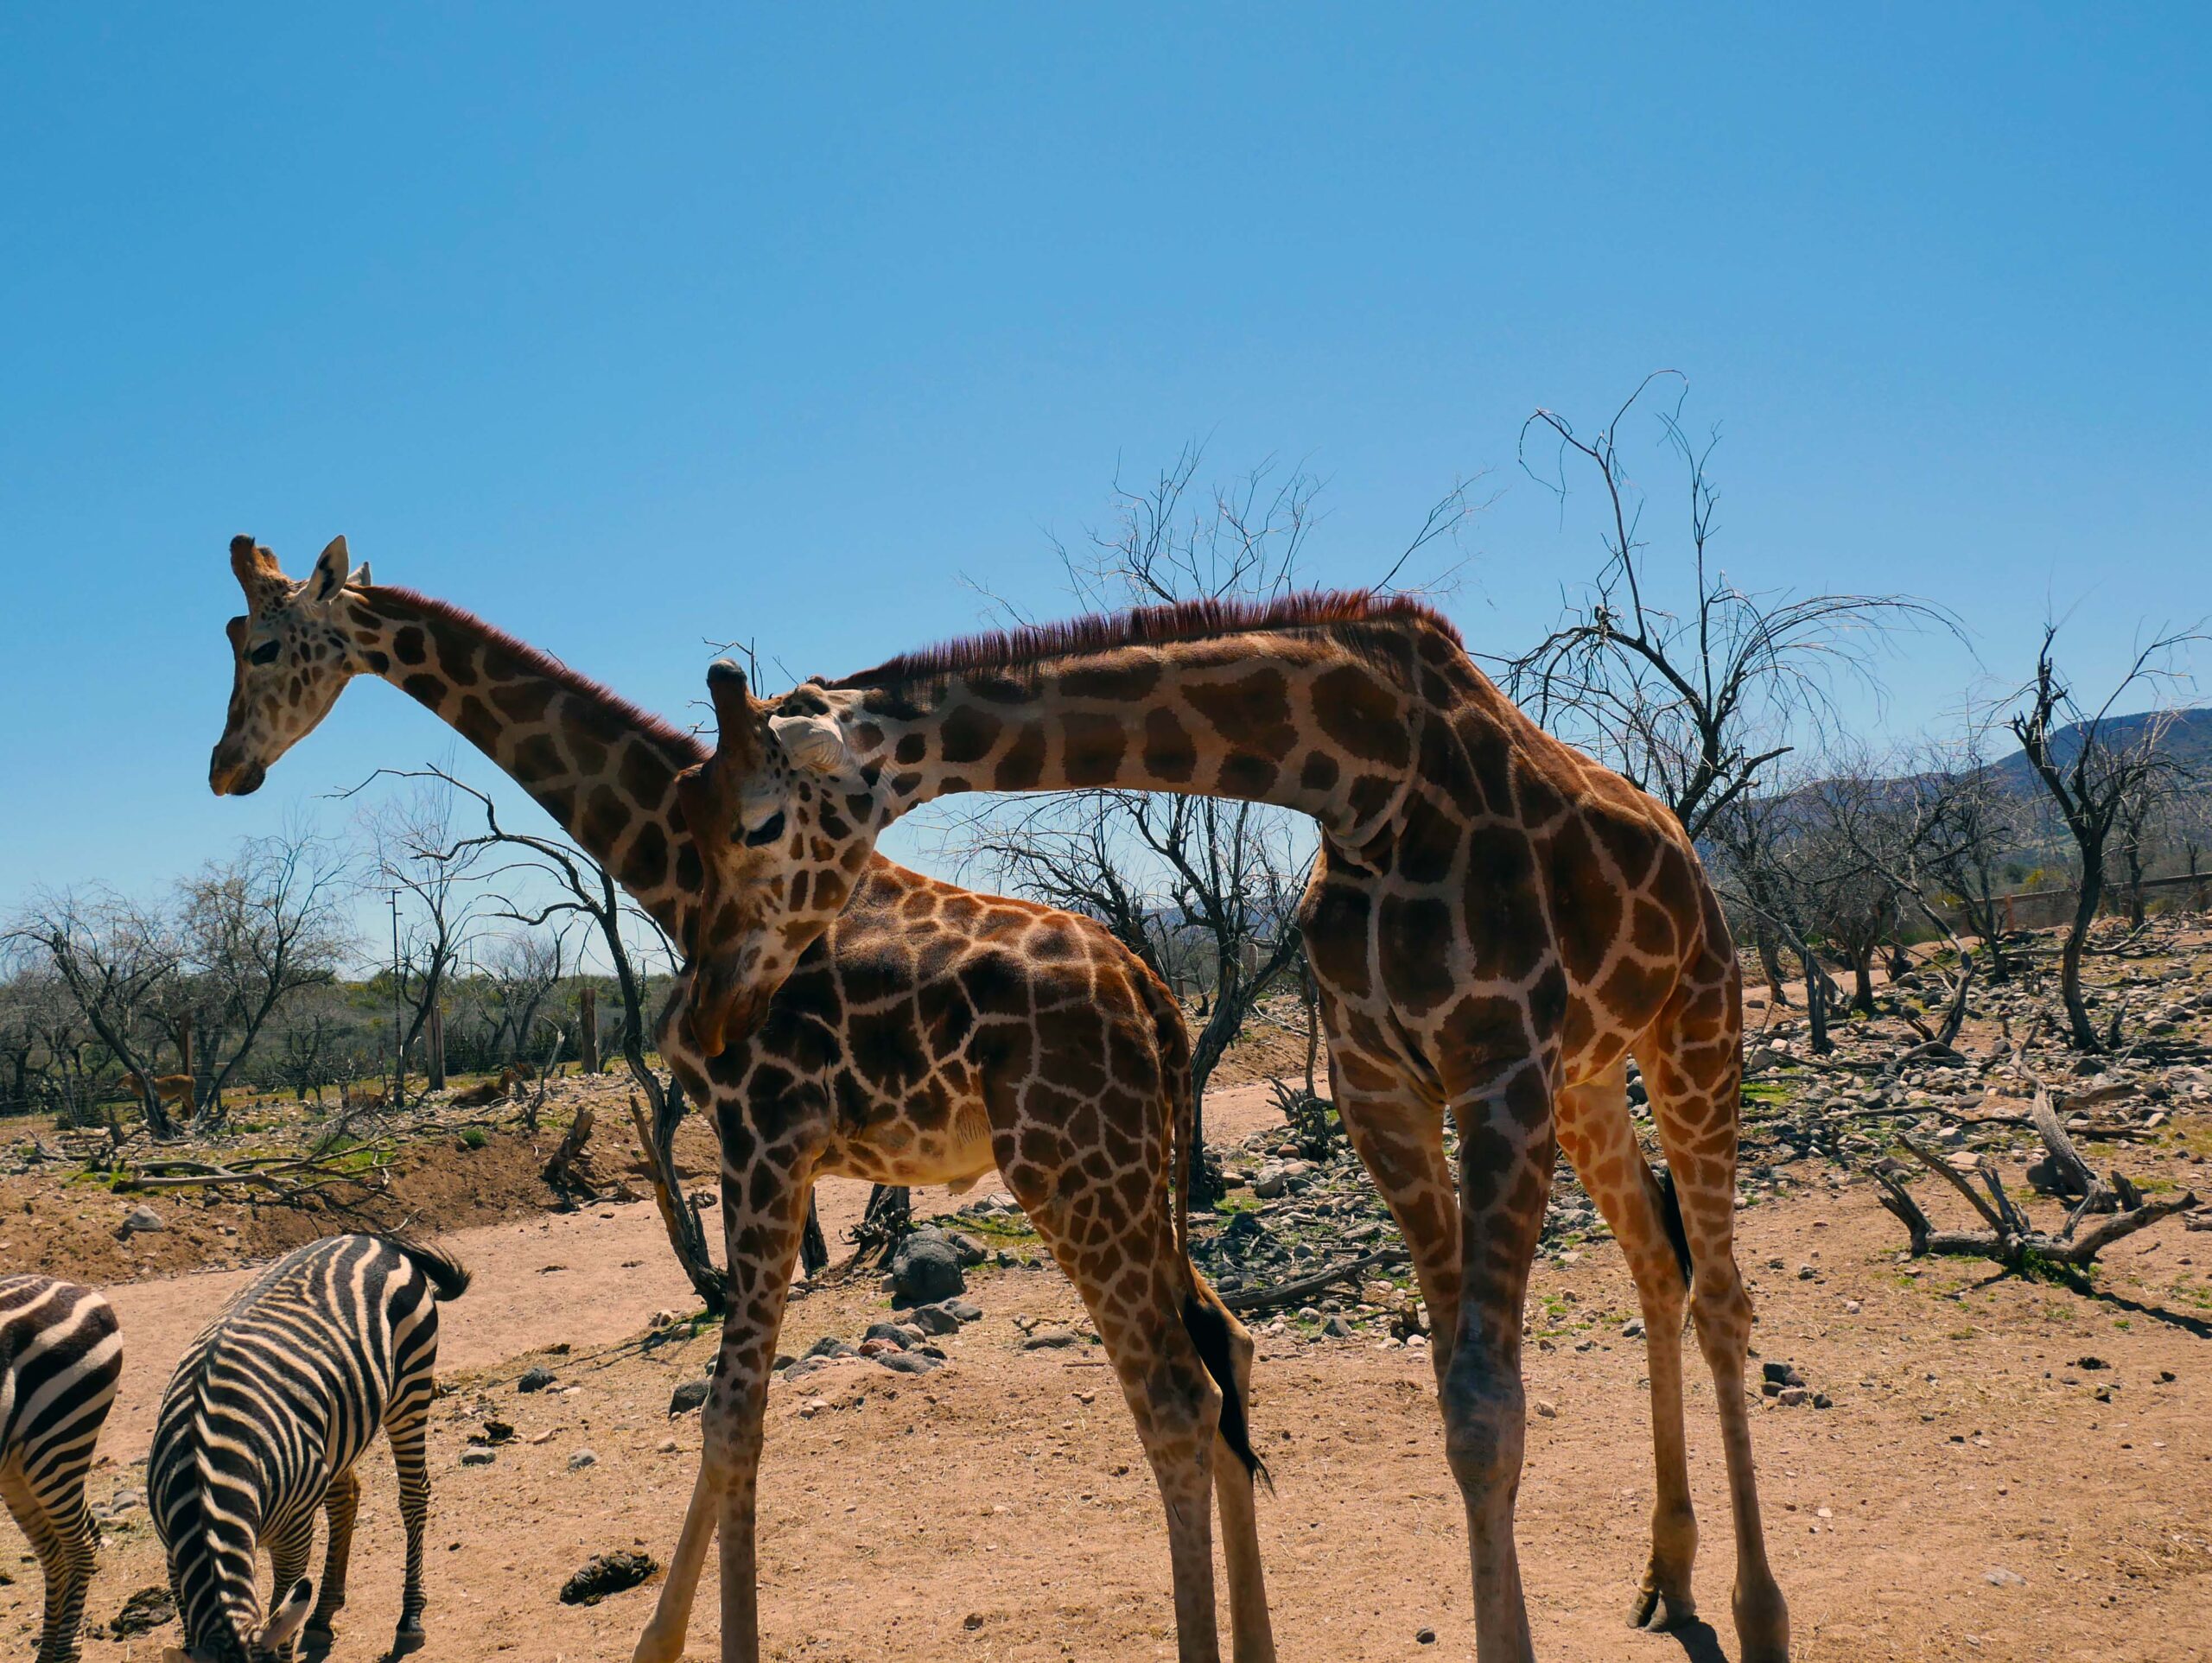 What are 10 interesting facts about baby giraffes?